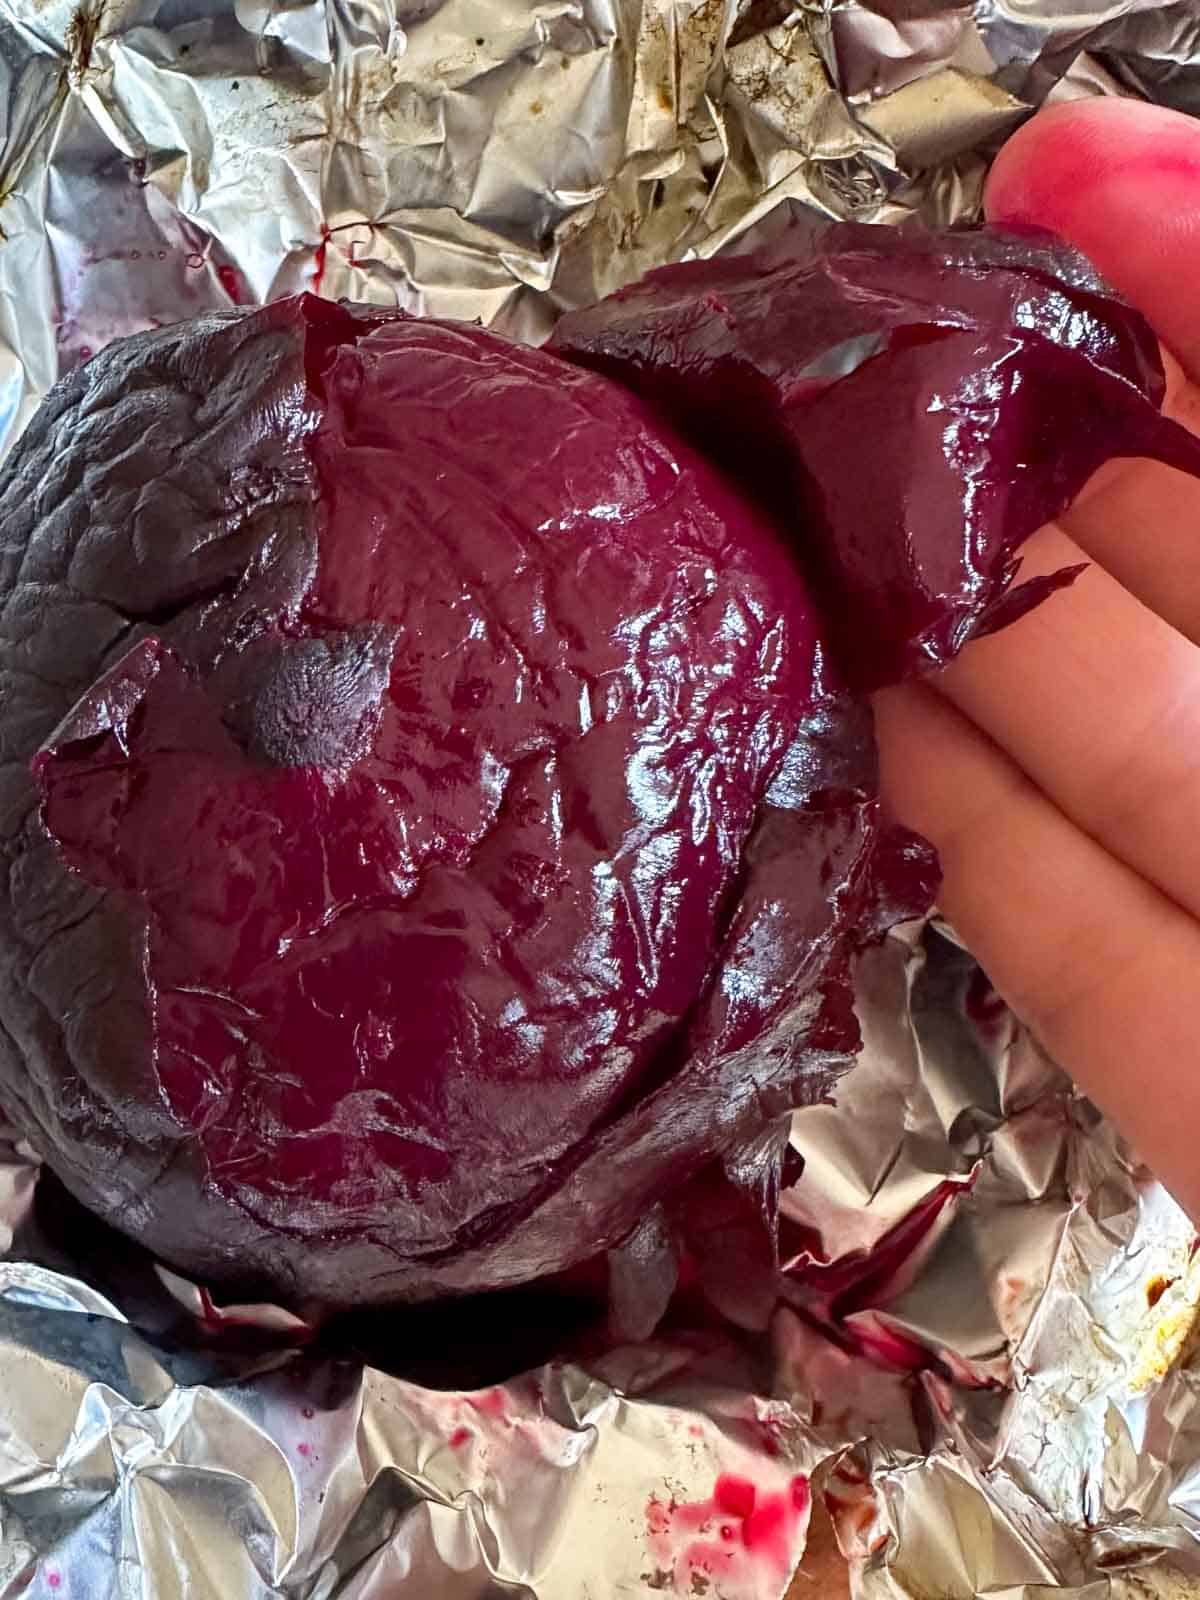 A whole beet that has been roasted in the oven on a sheet of aluminum foil, and a hand holding some of the skin of the beet which has been peeled off.